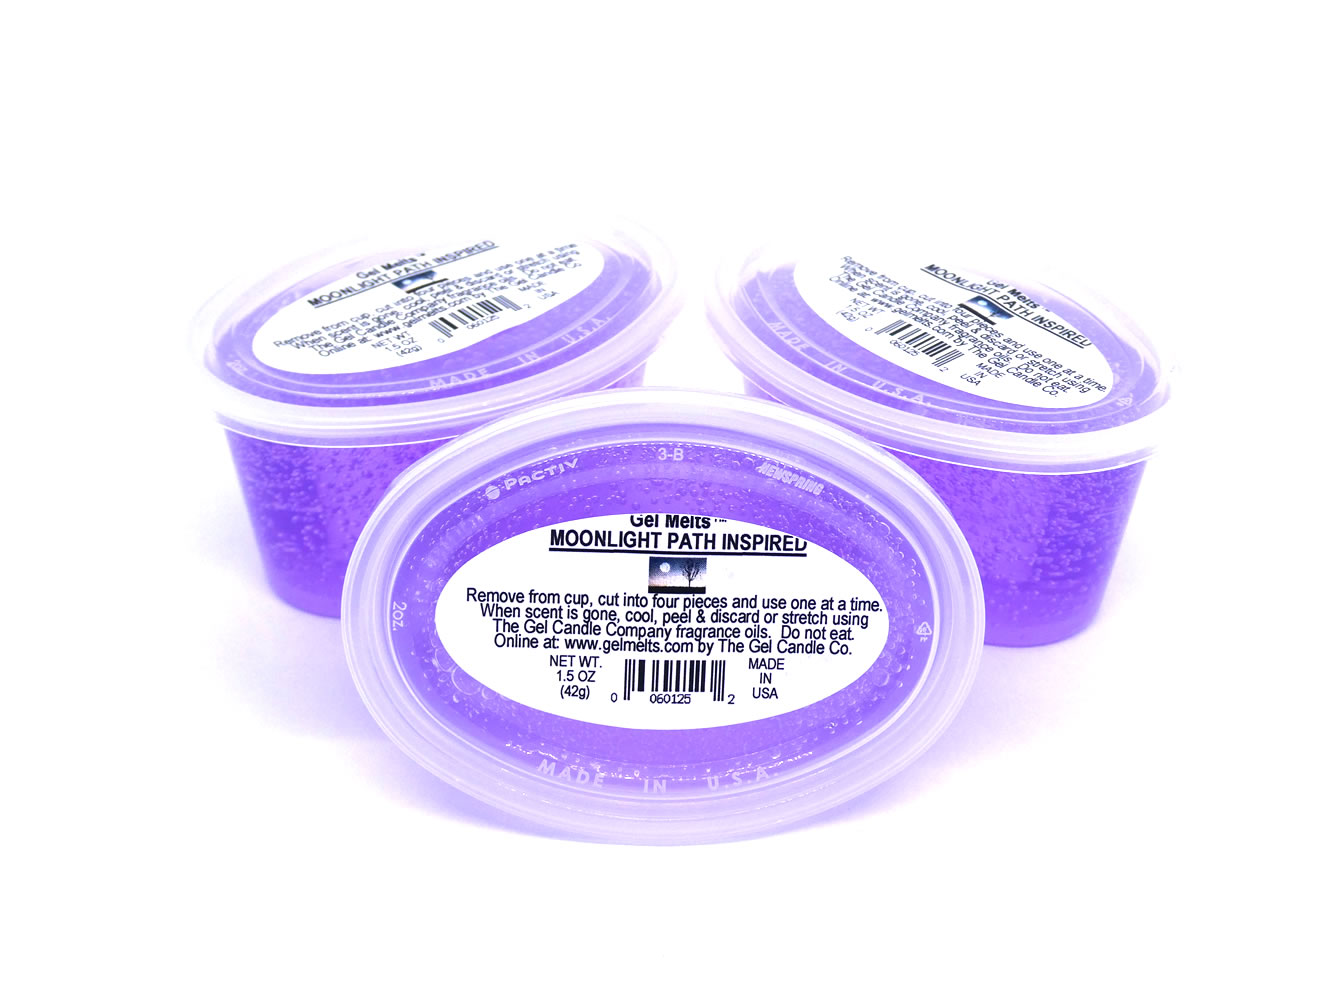 Moonlight Path Inspired Scented Gel Melts™ for warmer 3 pack